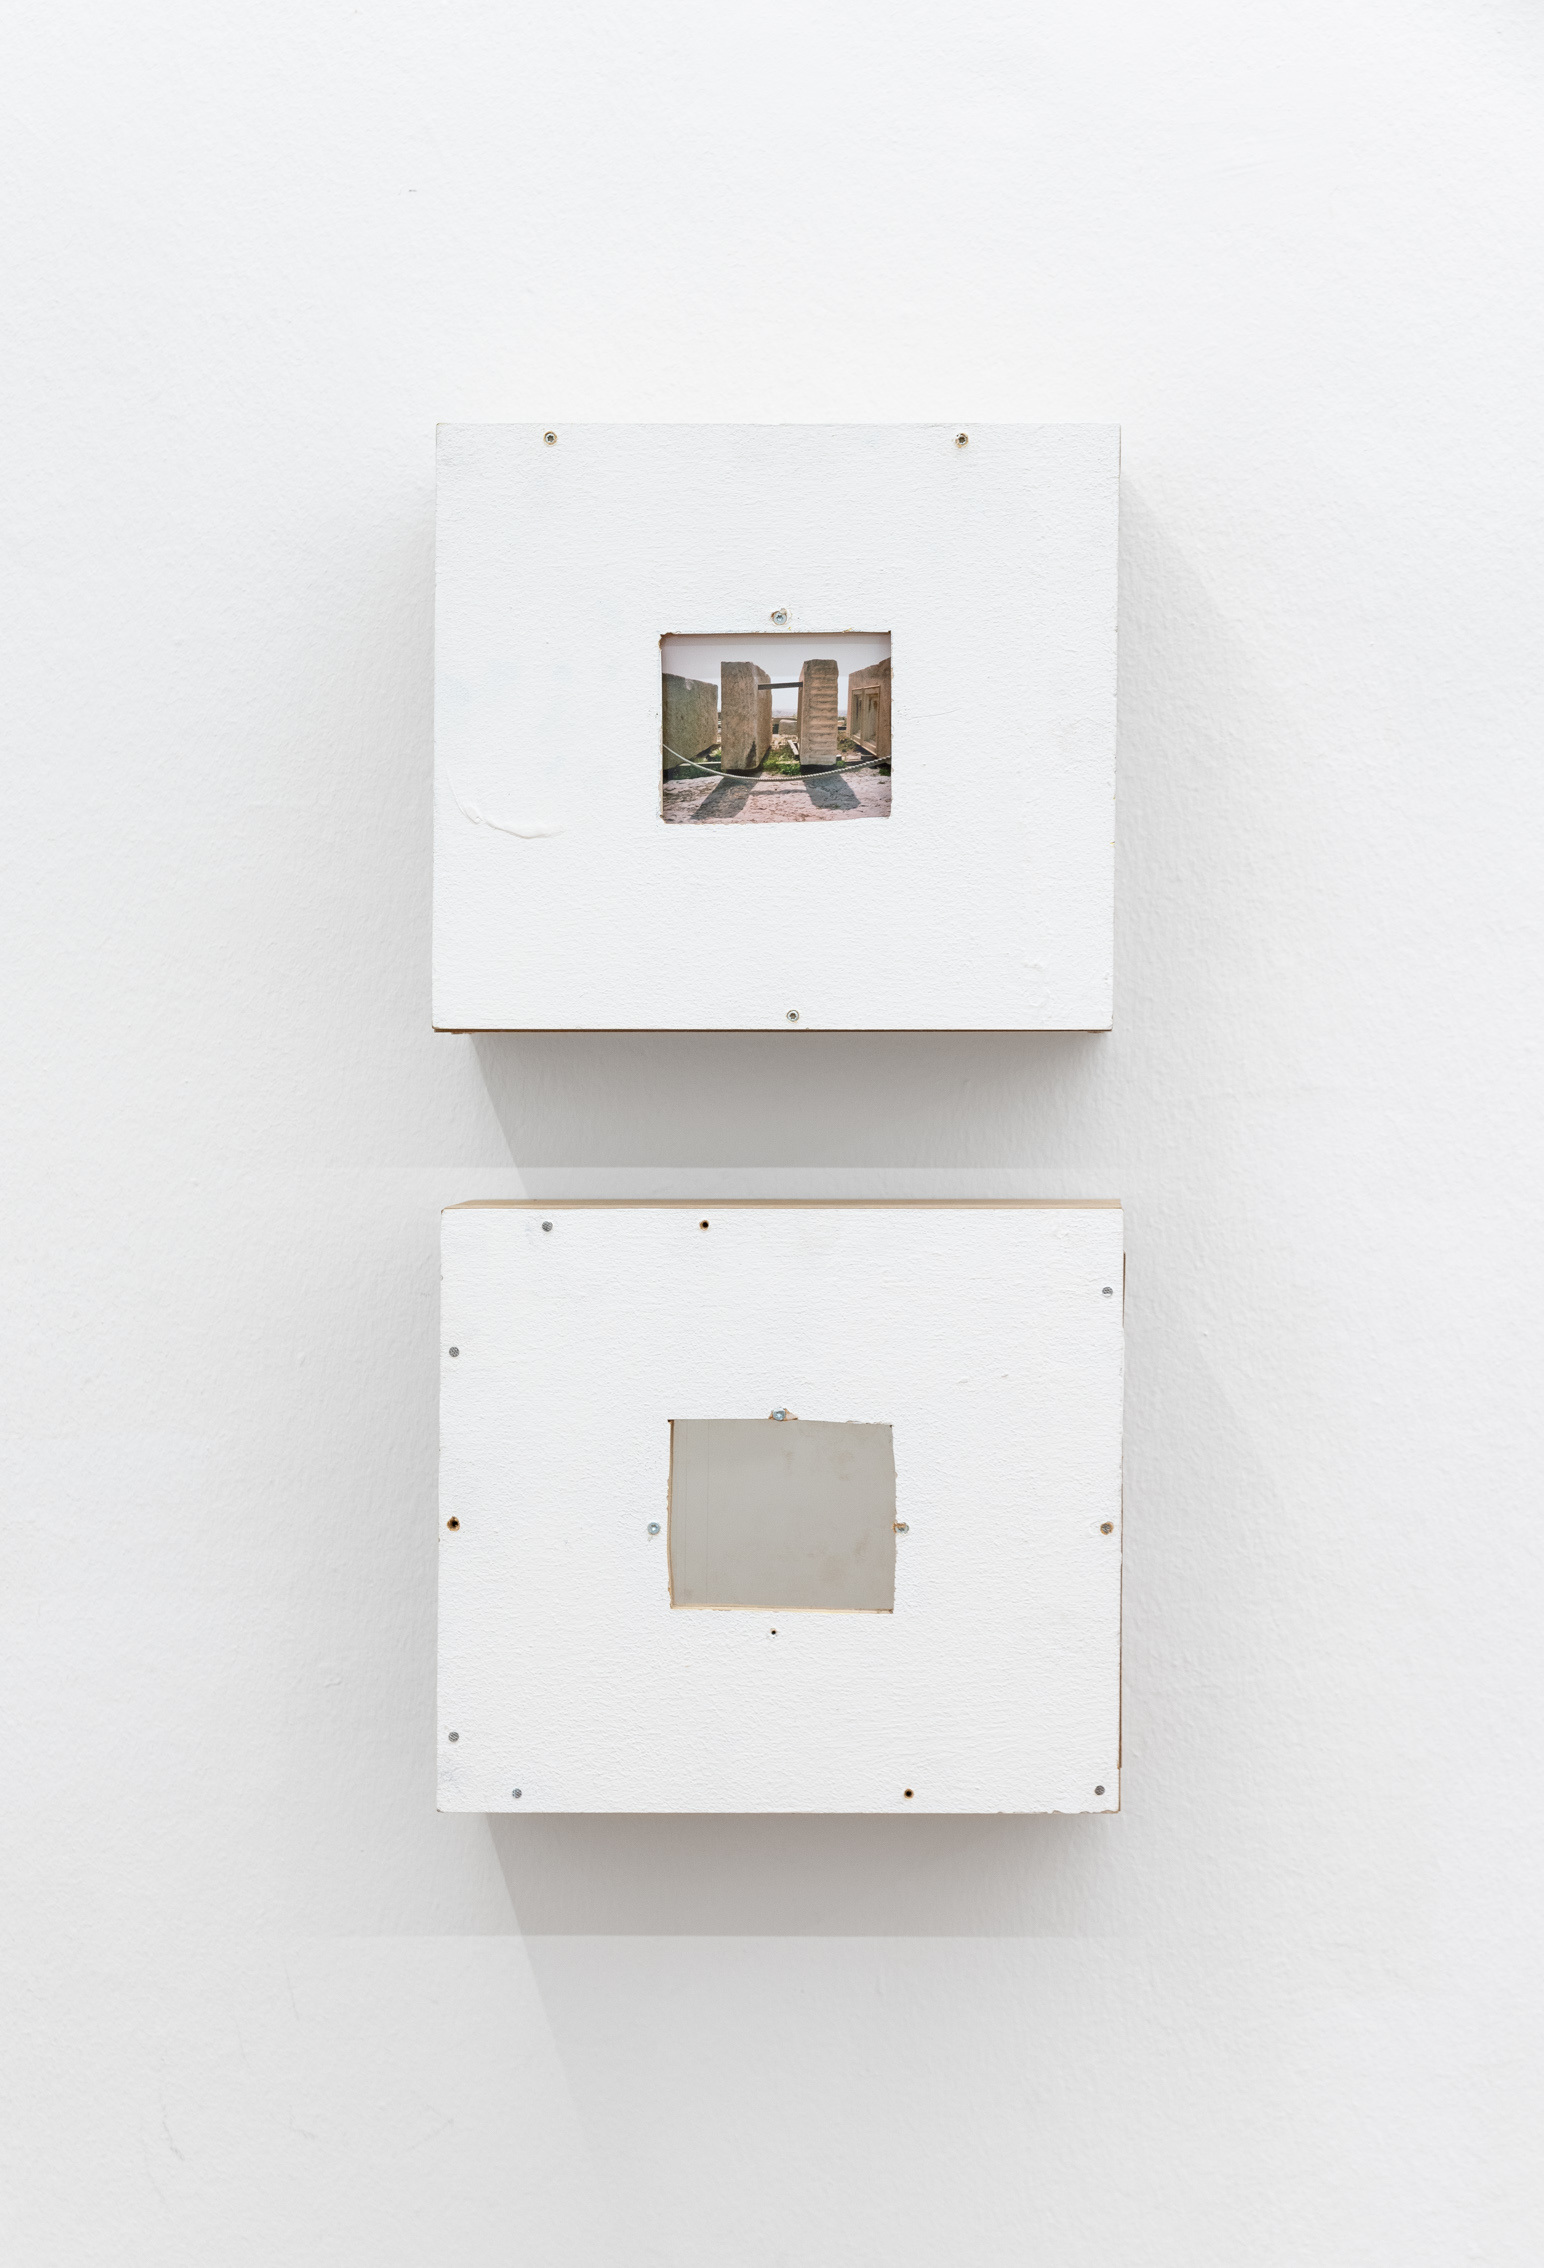 Patrick Ostrowsky, almsbox VI (athens)/almsbox V (me, not, not-me), 2024, wood, MDF, plywood, photograph, 26 x 29,5 x 10,5 cm each